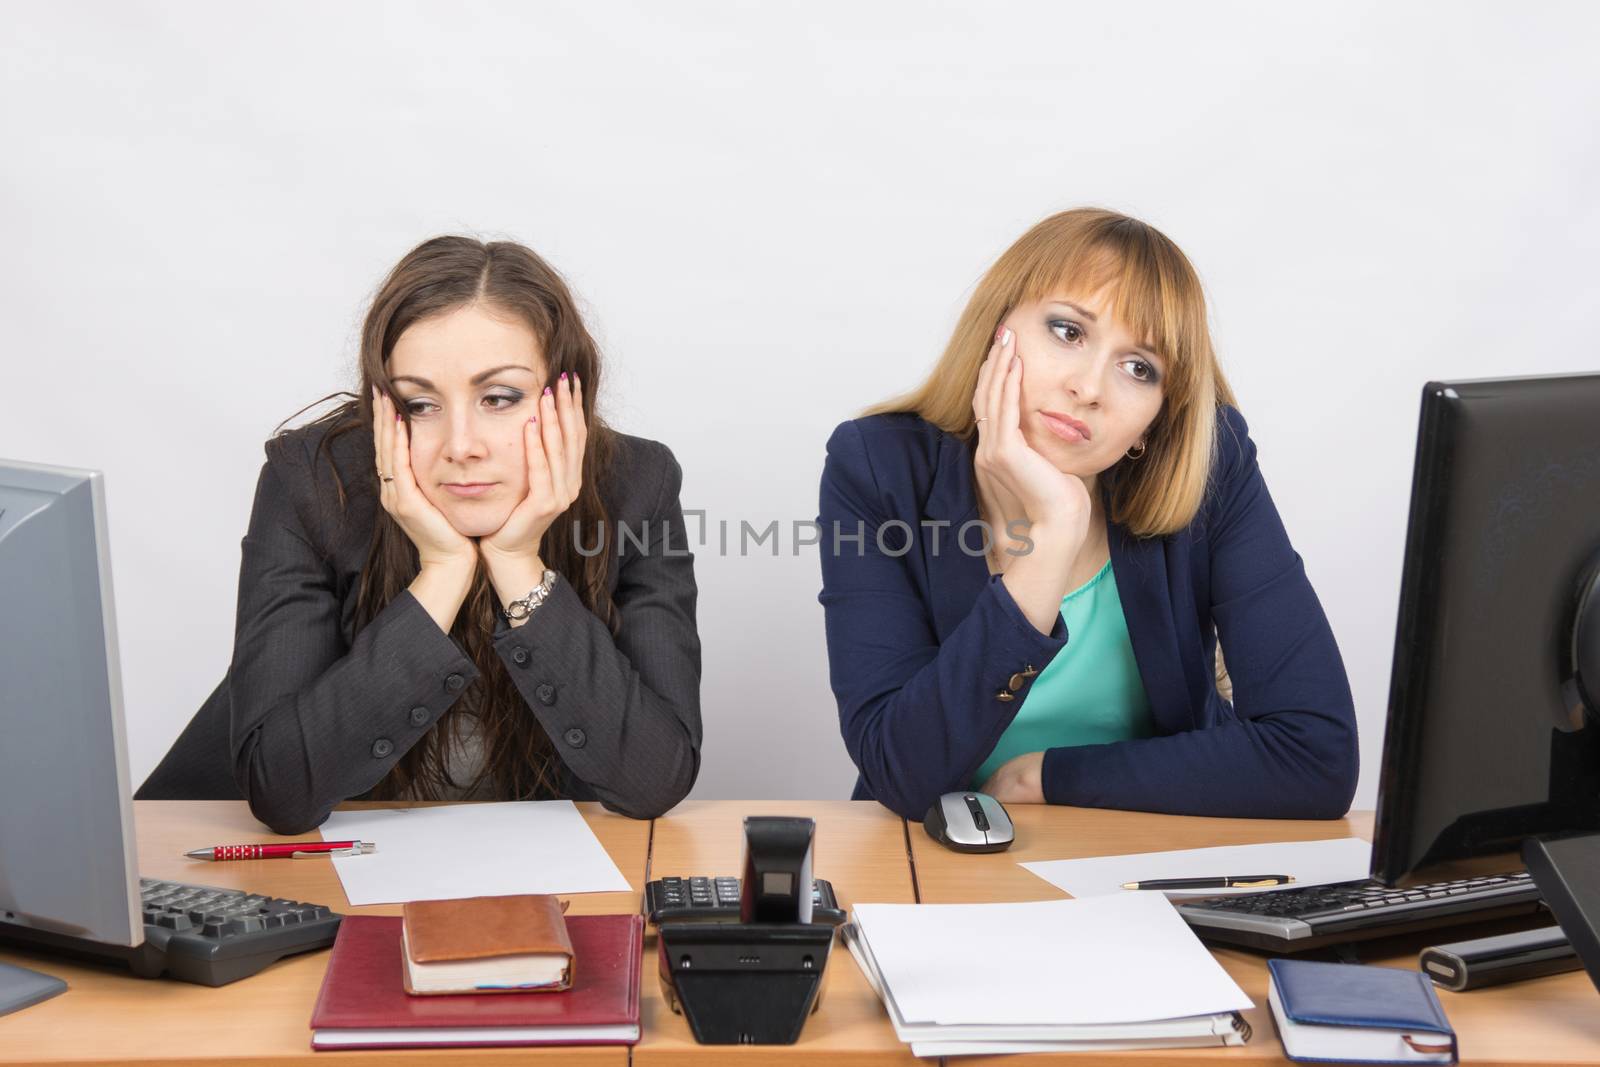  Two young office worker tired of sitting in front of computers